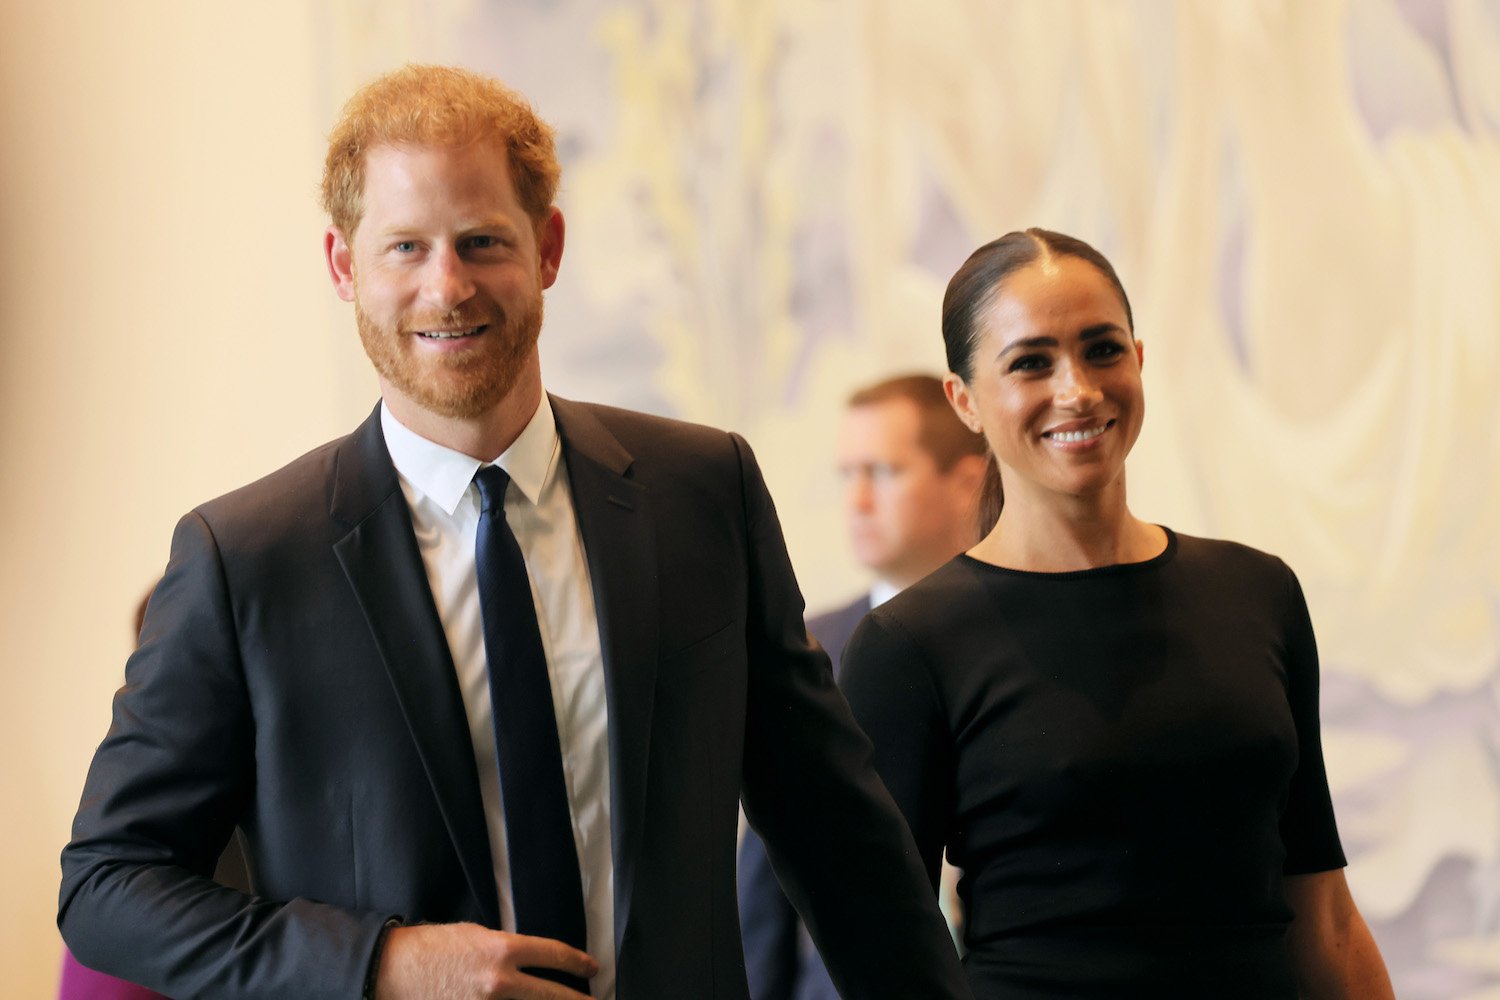 Prince Harry and Meghan Markle’s ‘Power Couple’ Body Language in New Photos Is Revealing, Expert Says